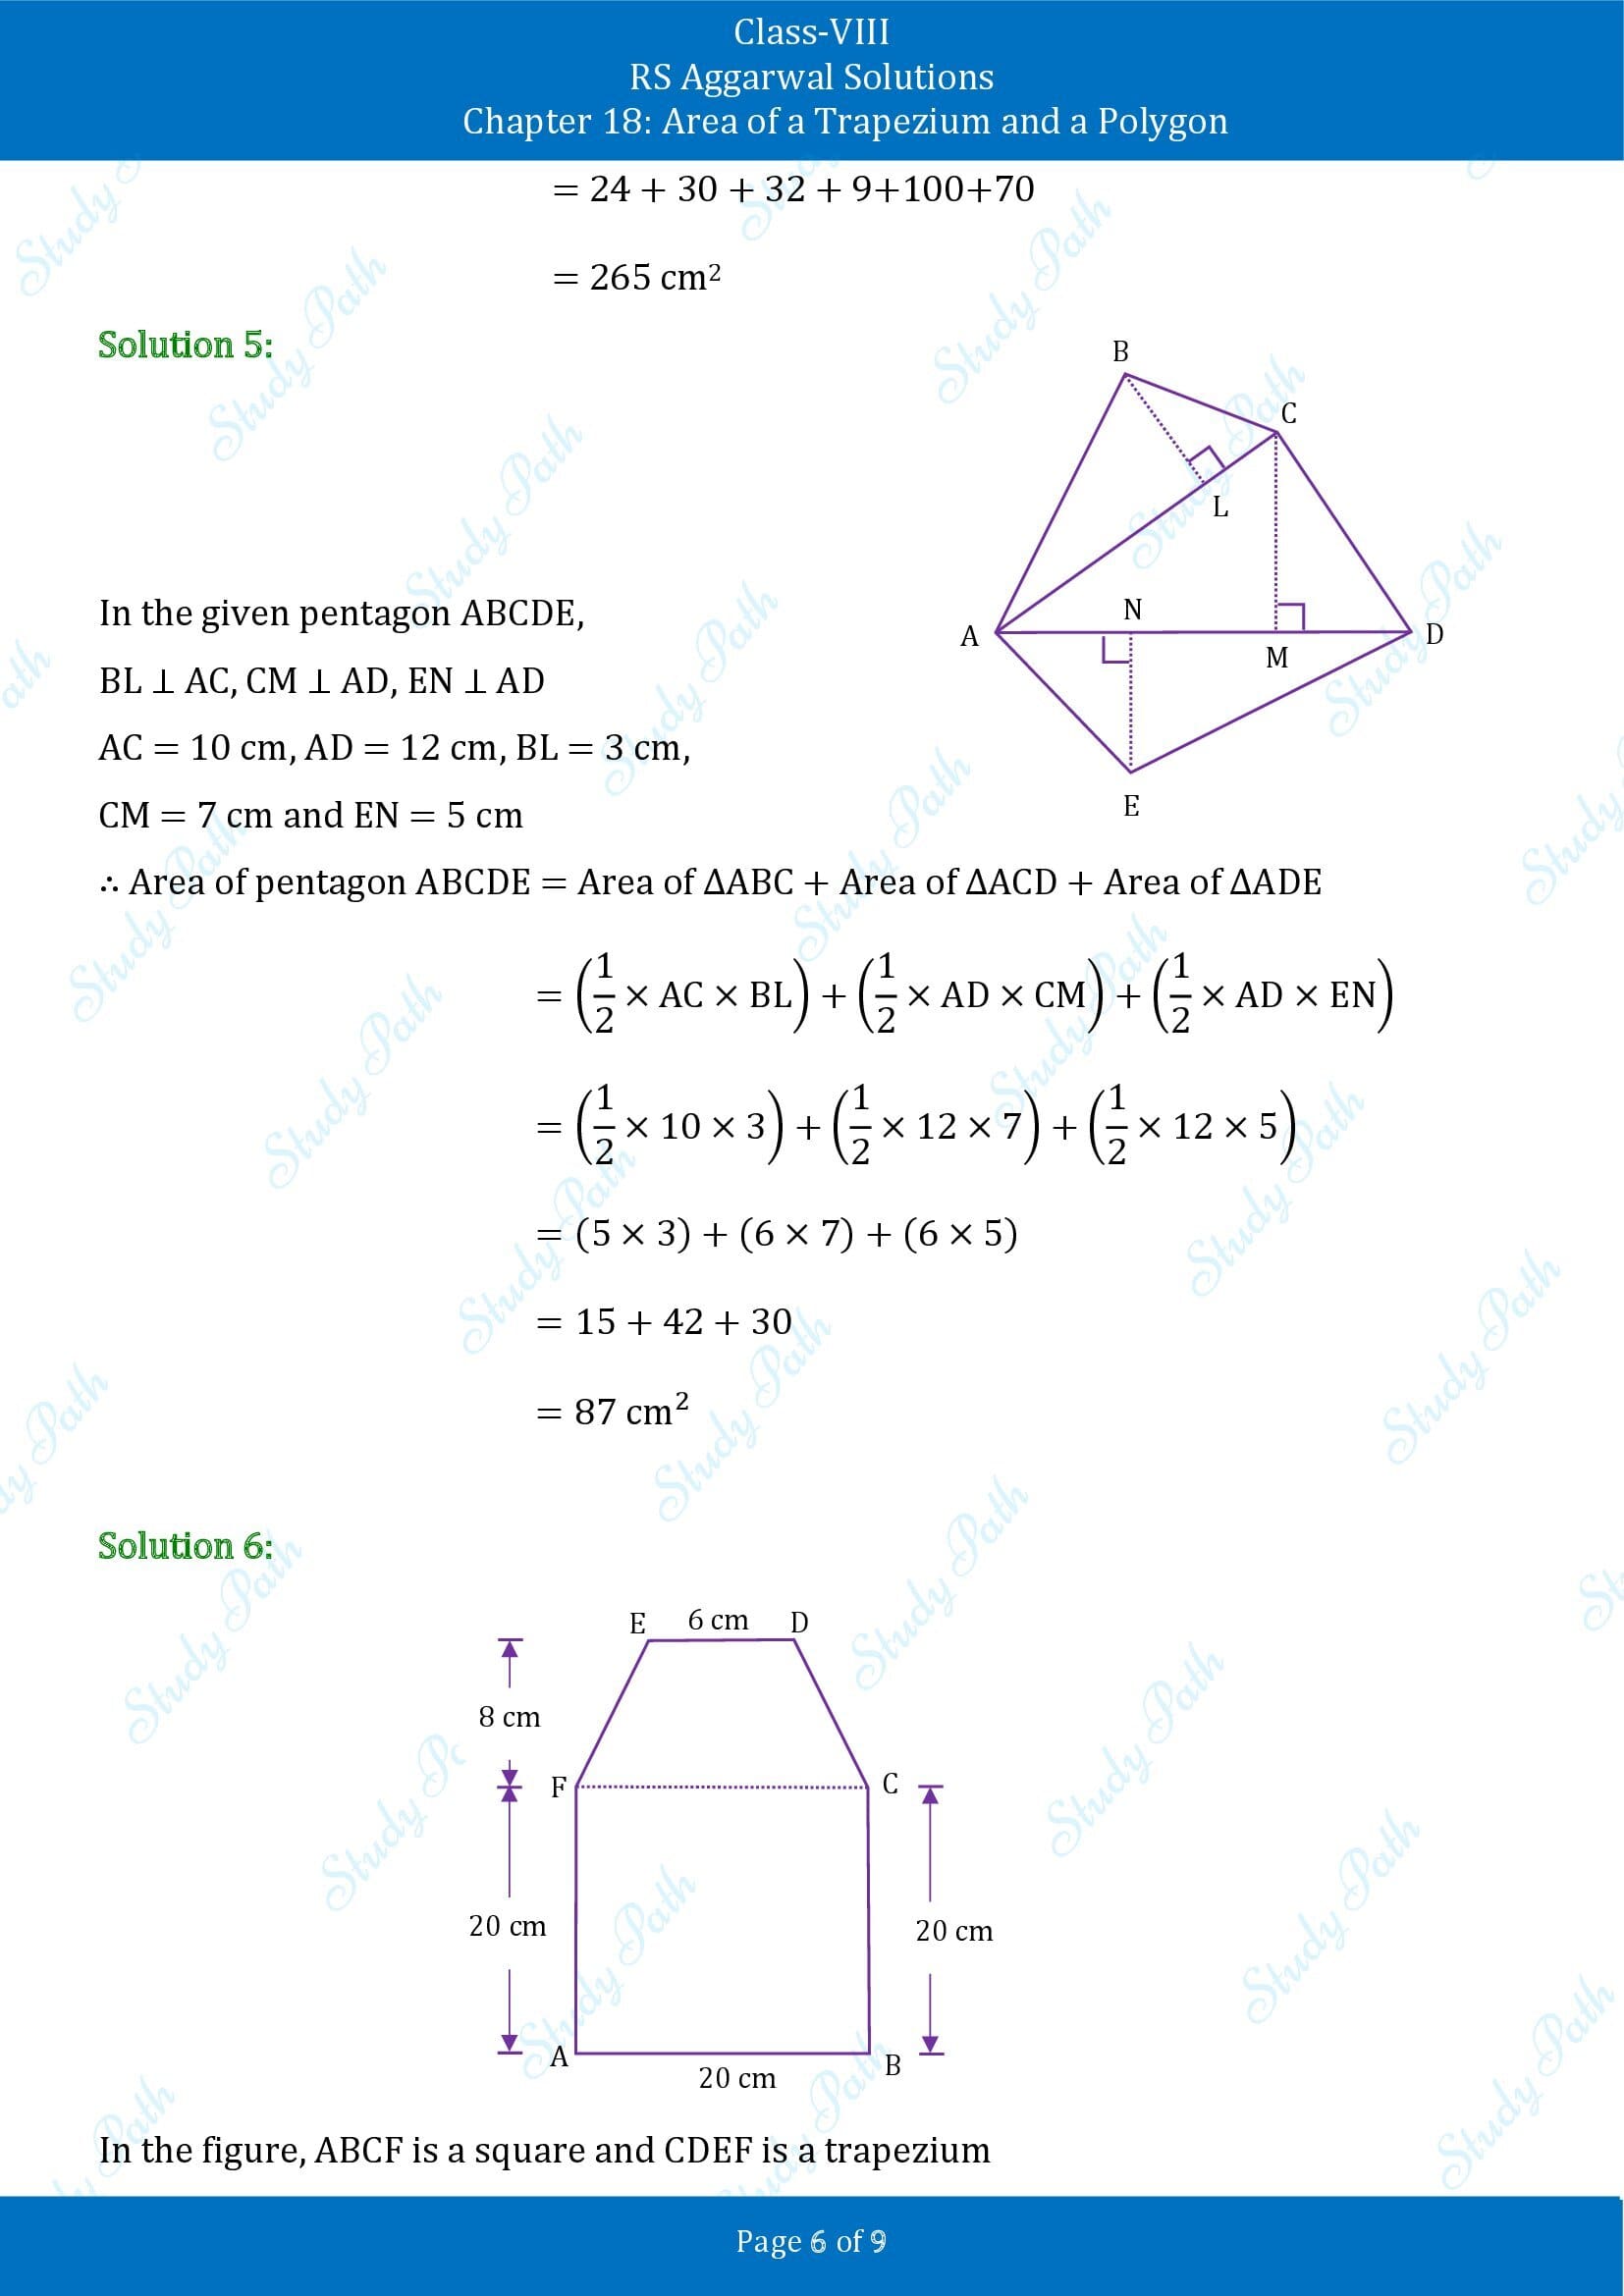 RS Aggarwal Solutions Class 8 Chapter 18 Area of a Trapezium and a Polygon Exercise 18B 00006